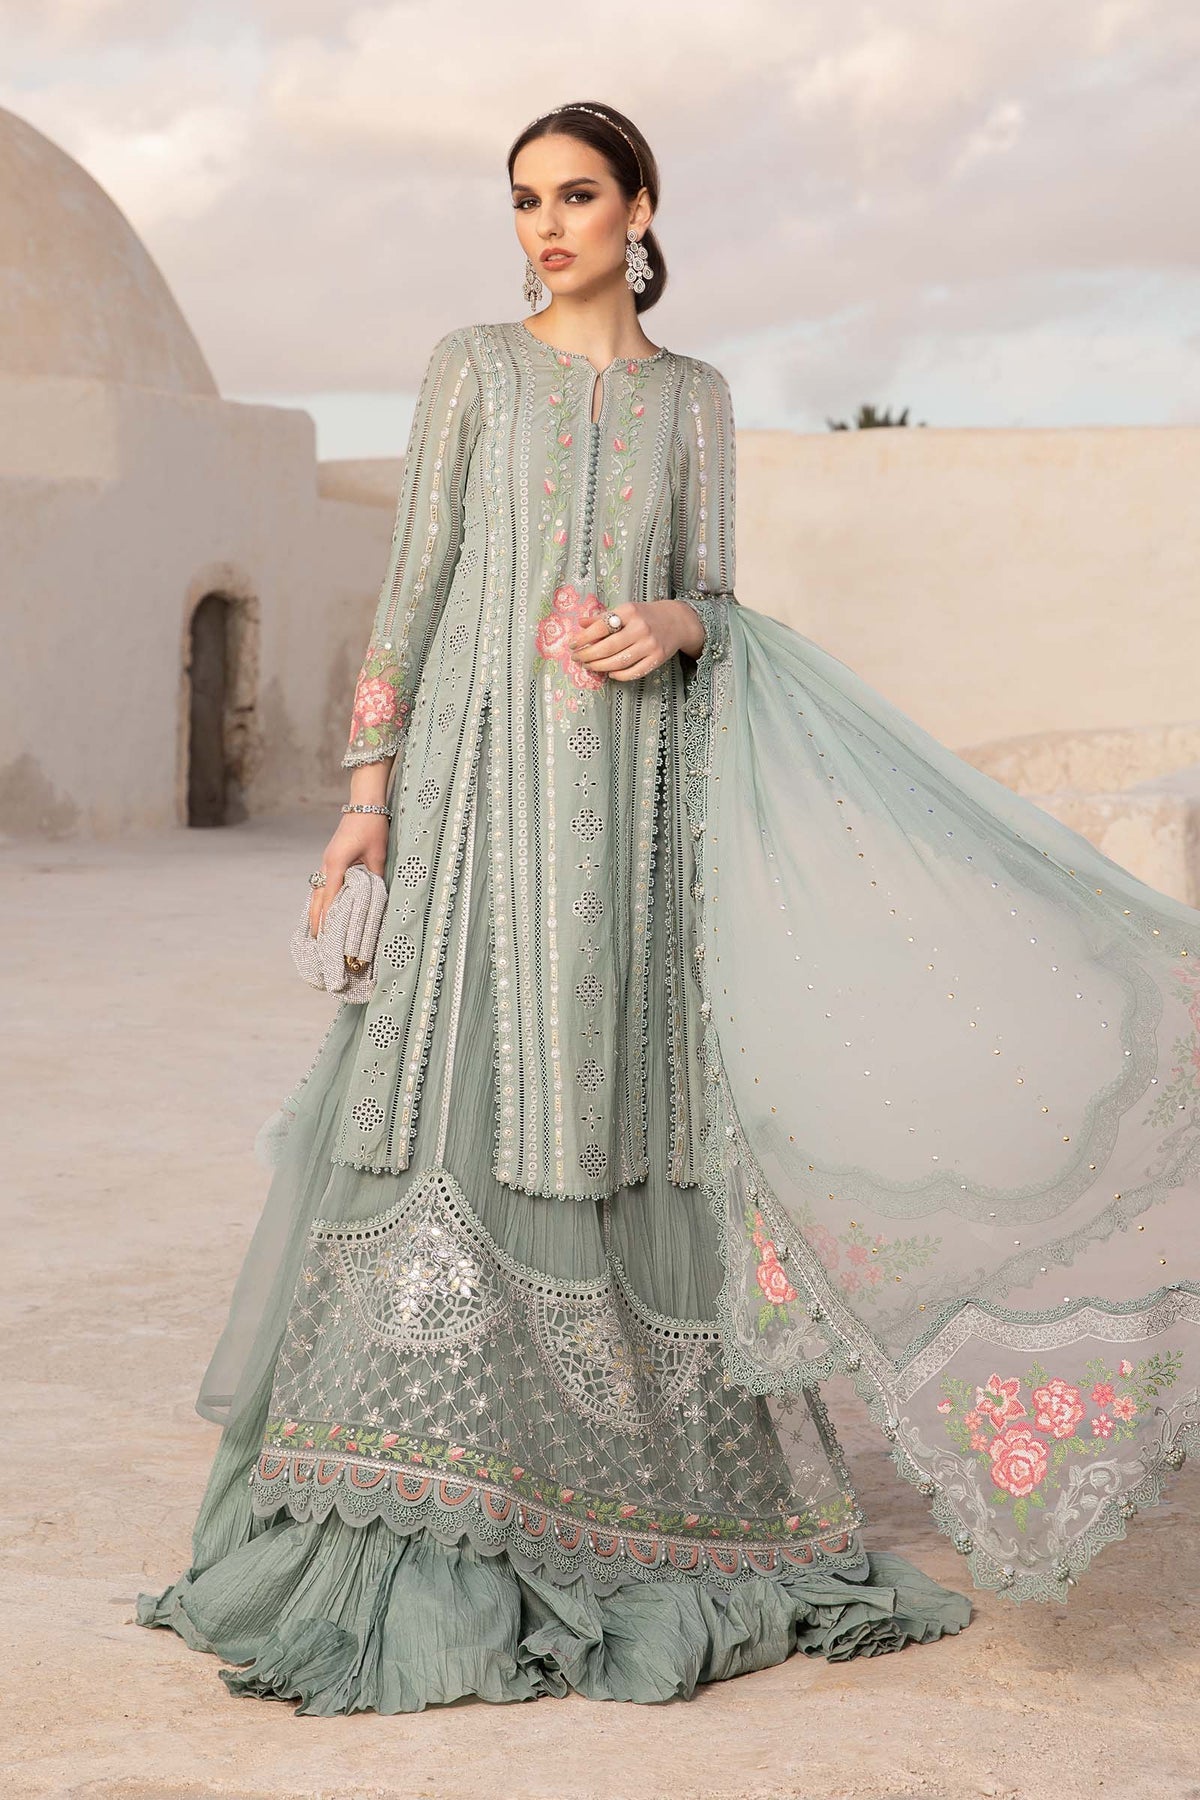 Maria. B 03 Piece Unstitched Printed Embroidered Lawn Suit - D-2412-B